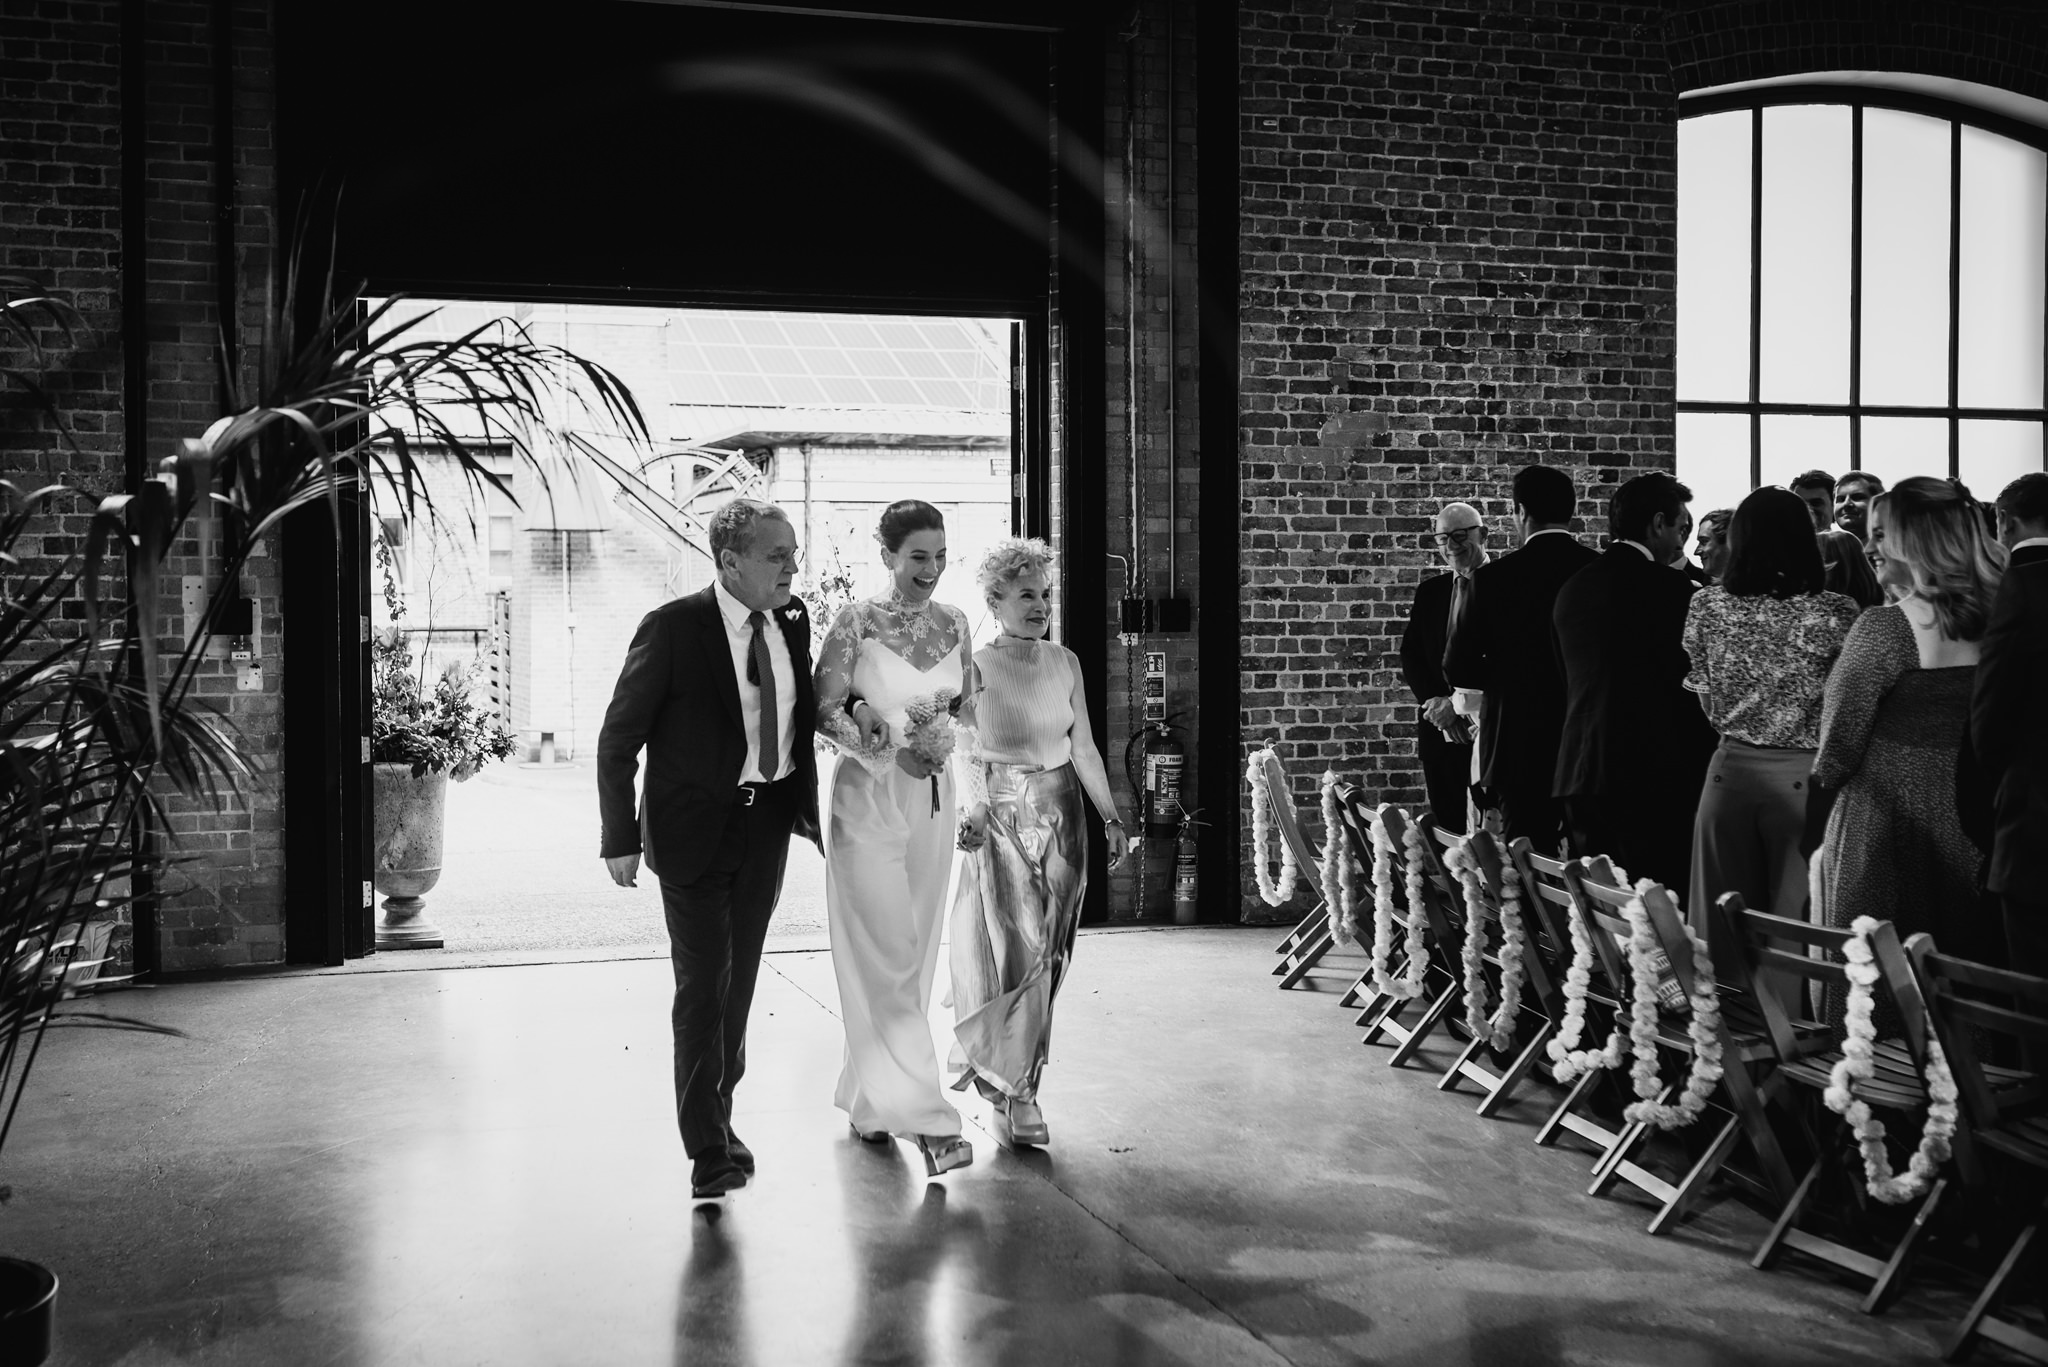 The arrival of the bride at Trinity Buoy Wharf Wedding